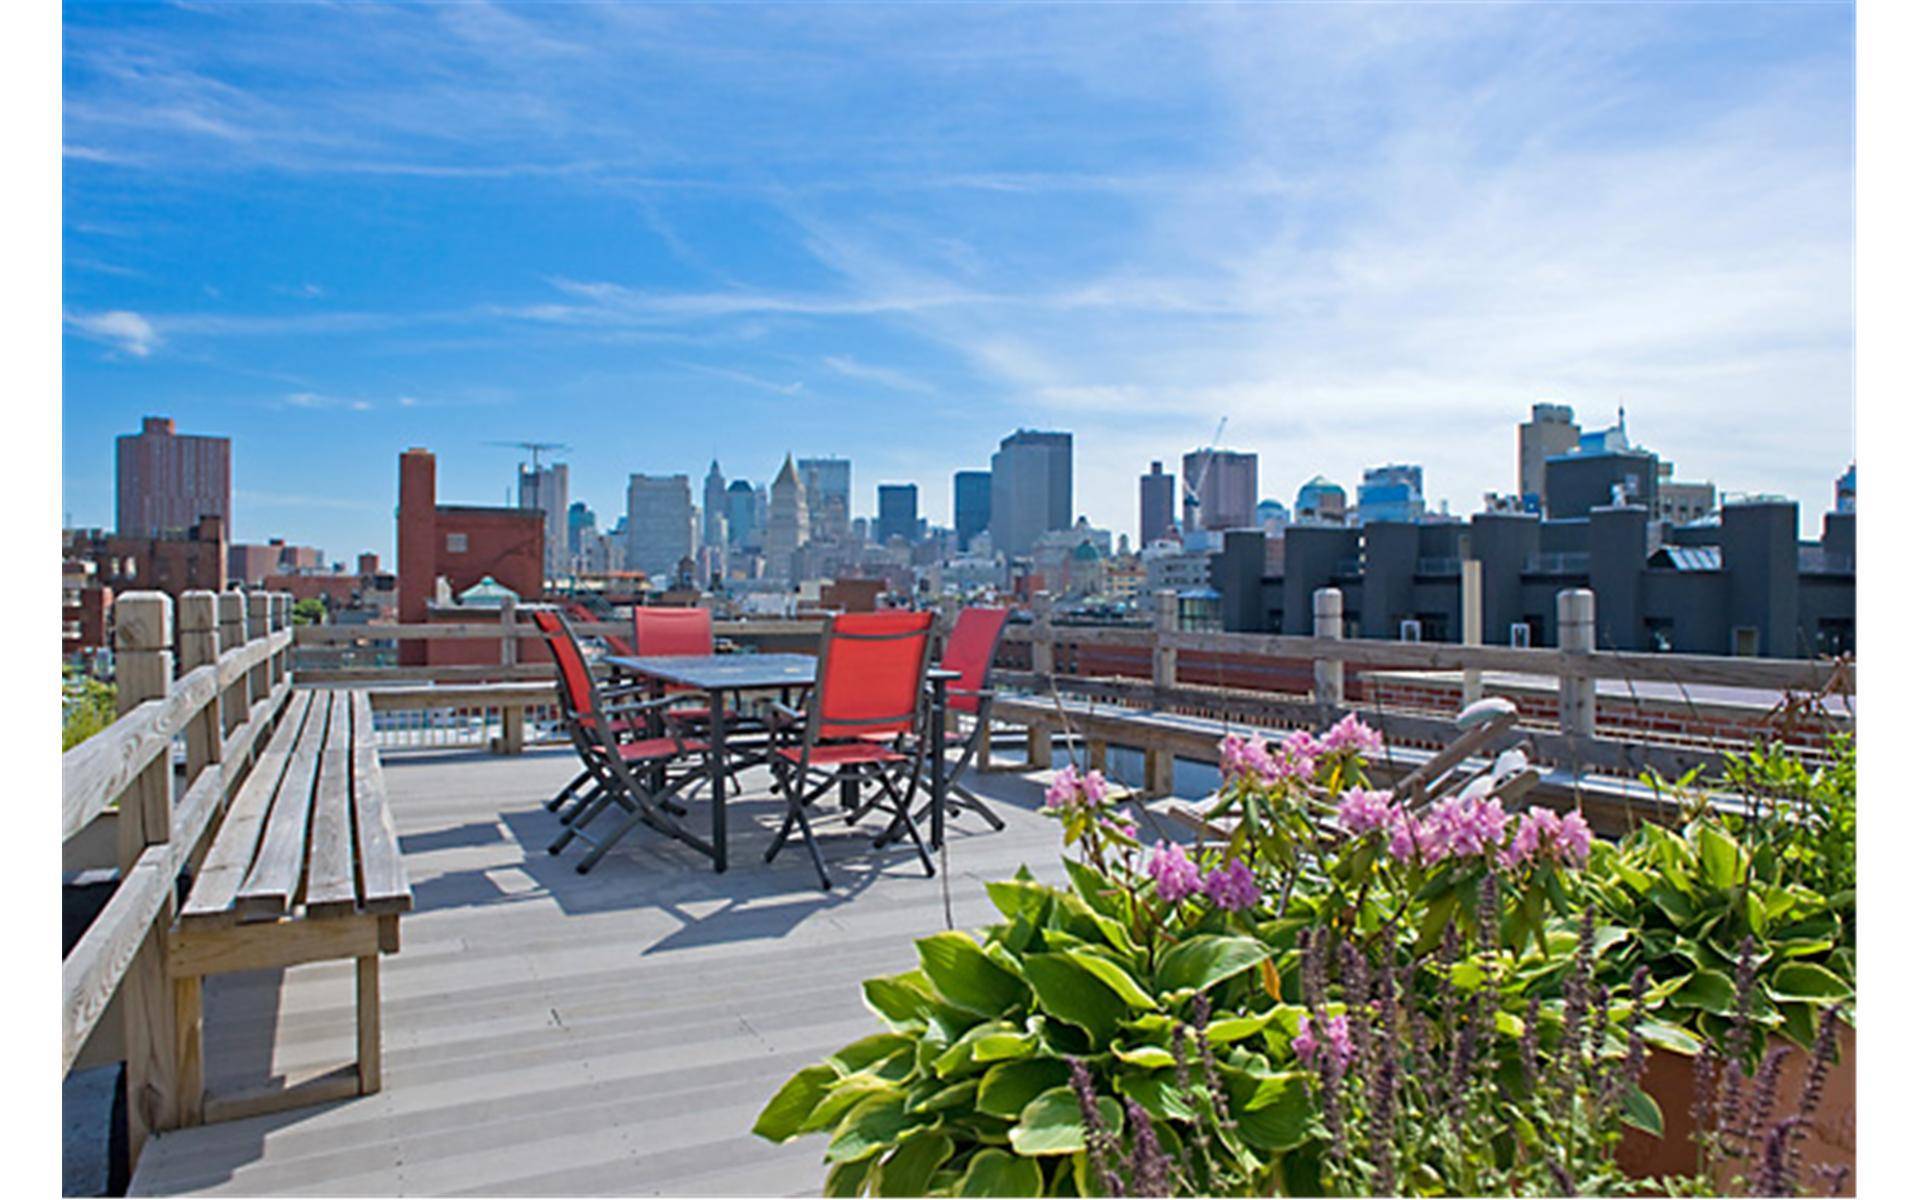 Nestled in the historic district of Nolita, this condominium complex boasts a shared rooftop deck, individual storage options, and a bicycle storage room, all just a stone's throw from the ...